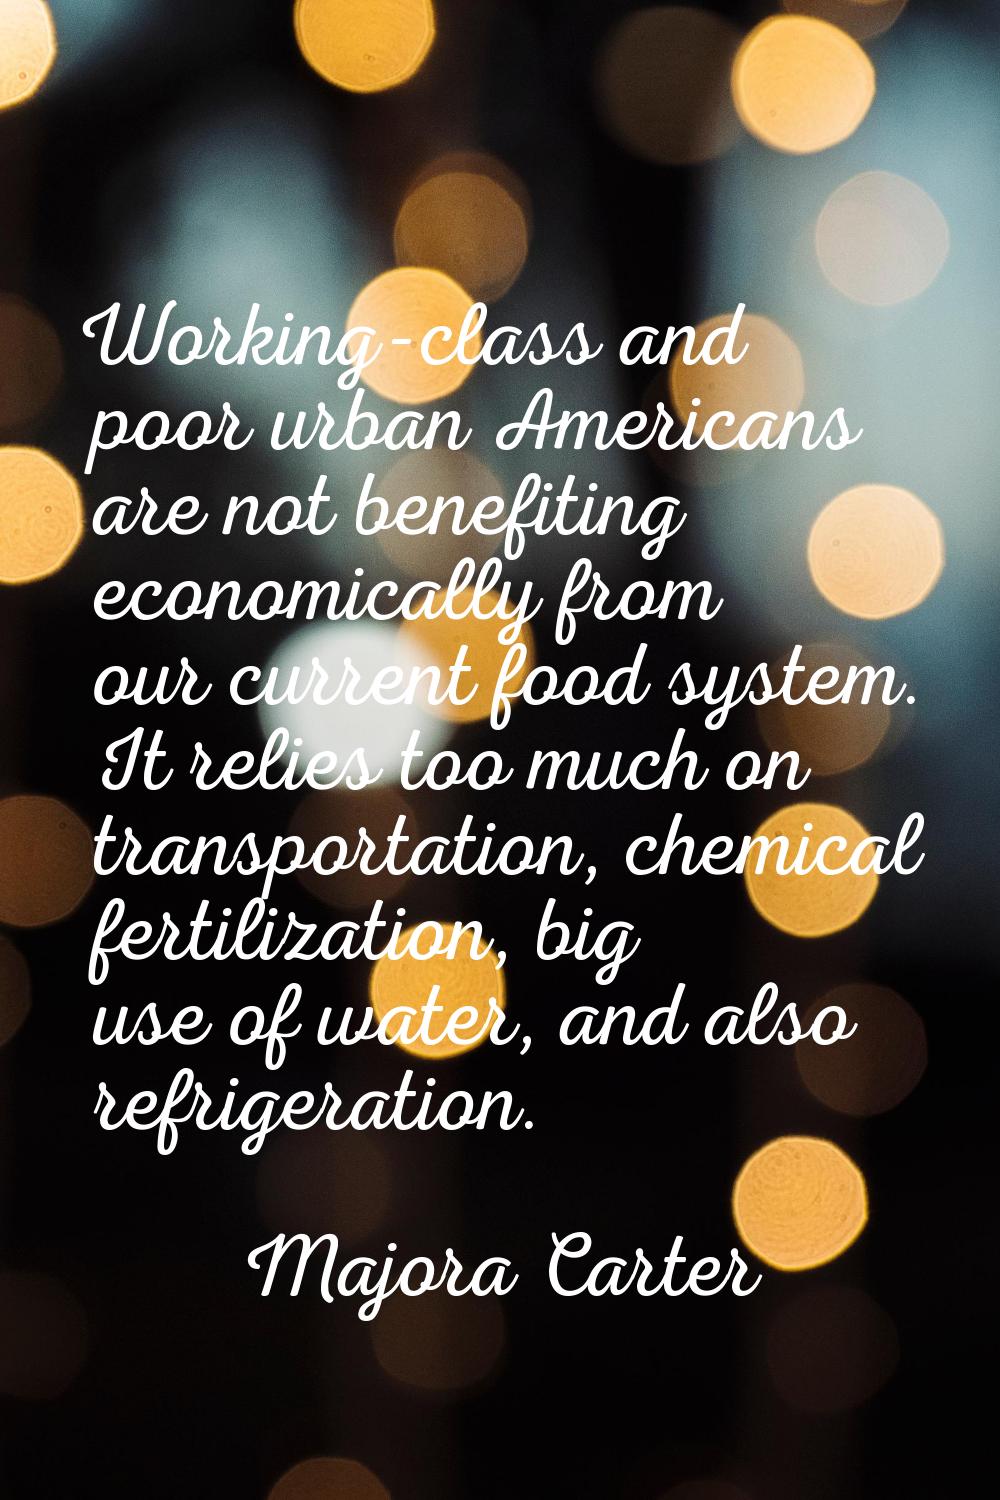 Working-class and poor urban Americans are not benefiting economically from our current food system